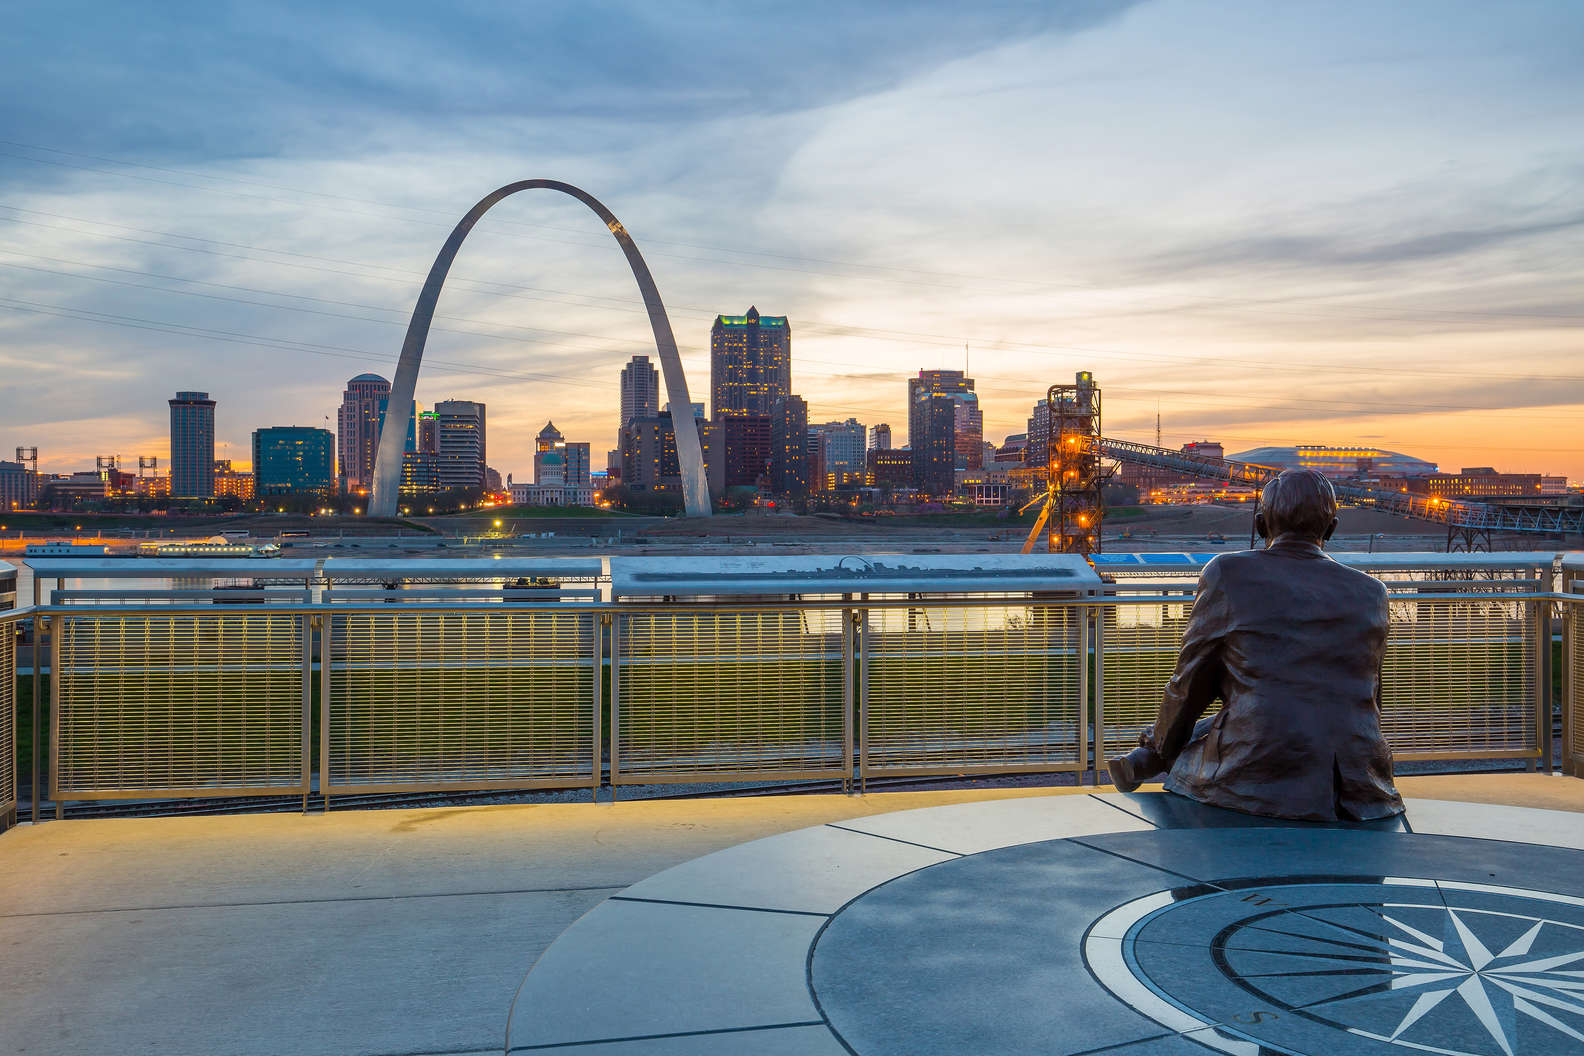 A view of St. Louis, Missouri from across the river